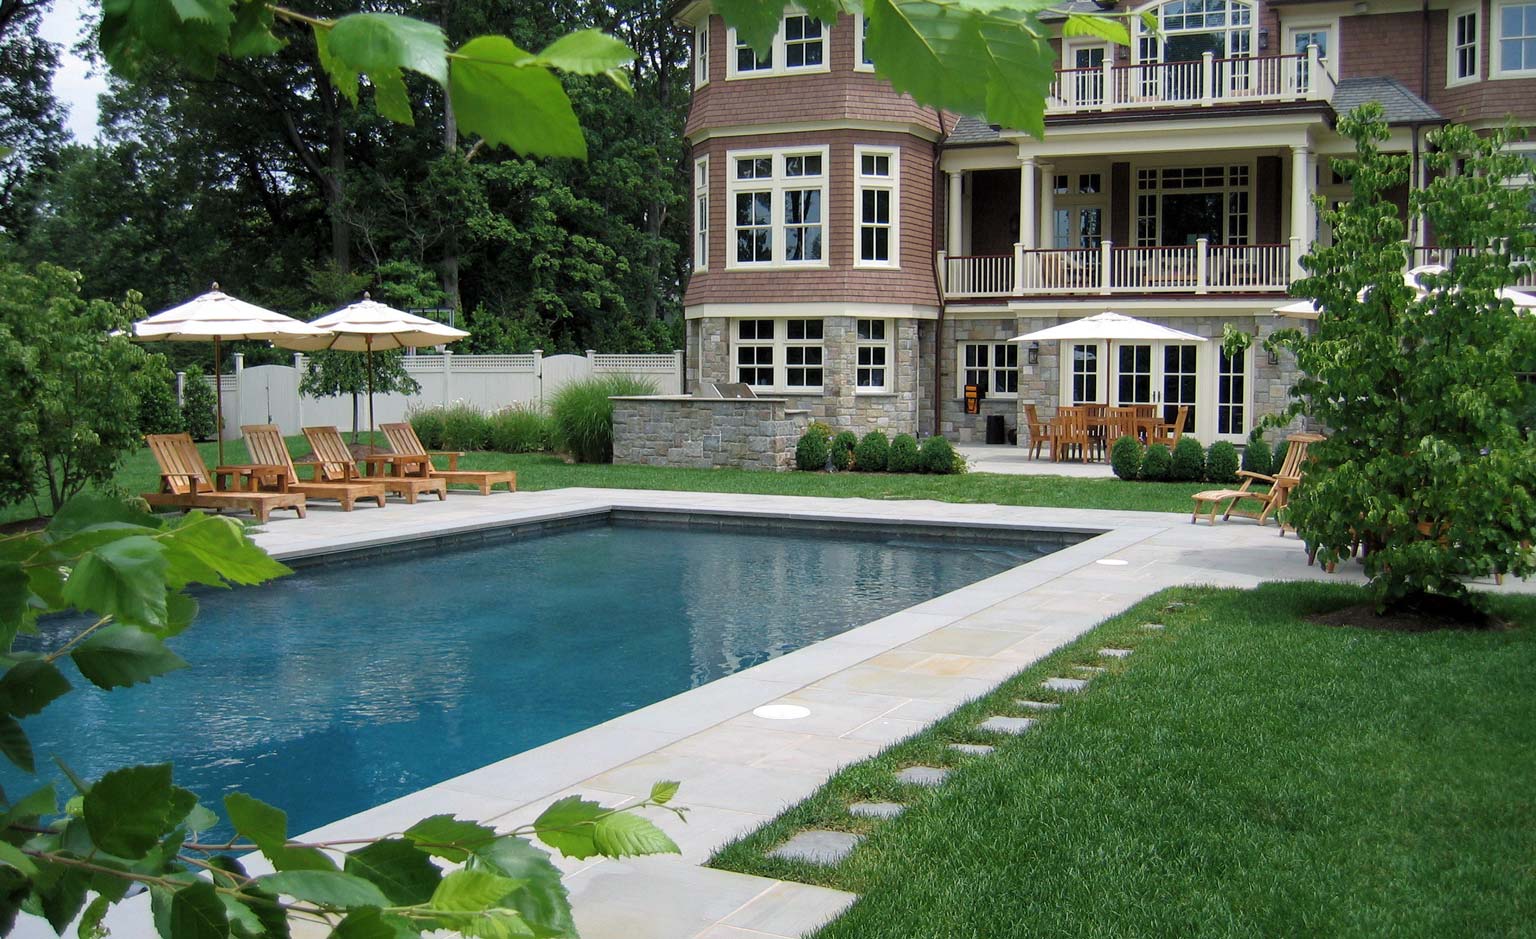 before and after landscape pictures, nj pool design